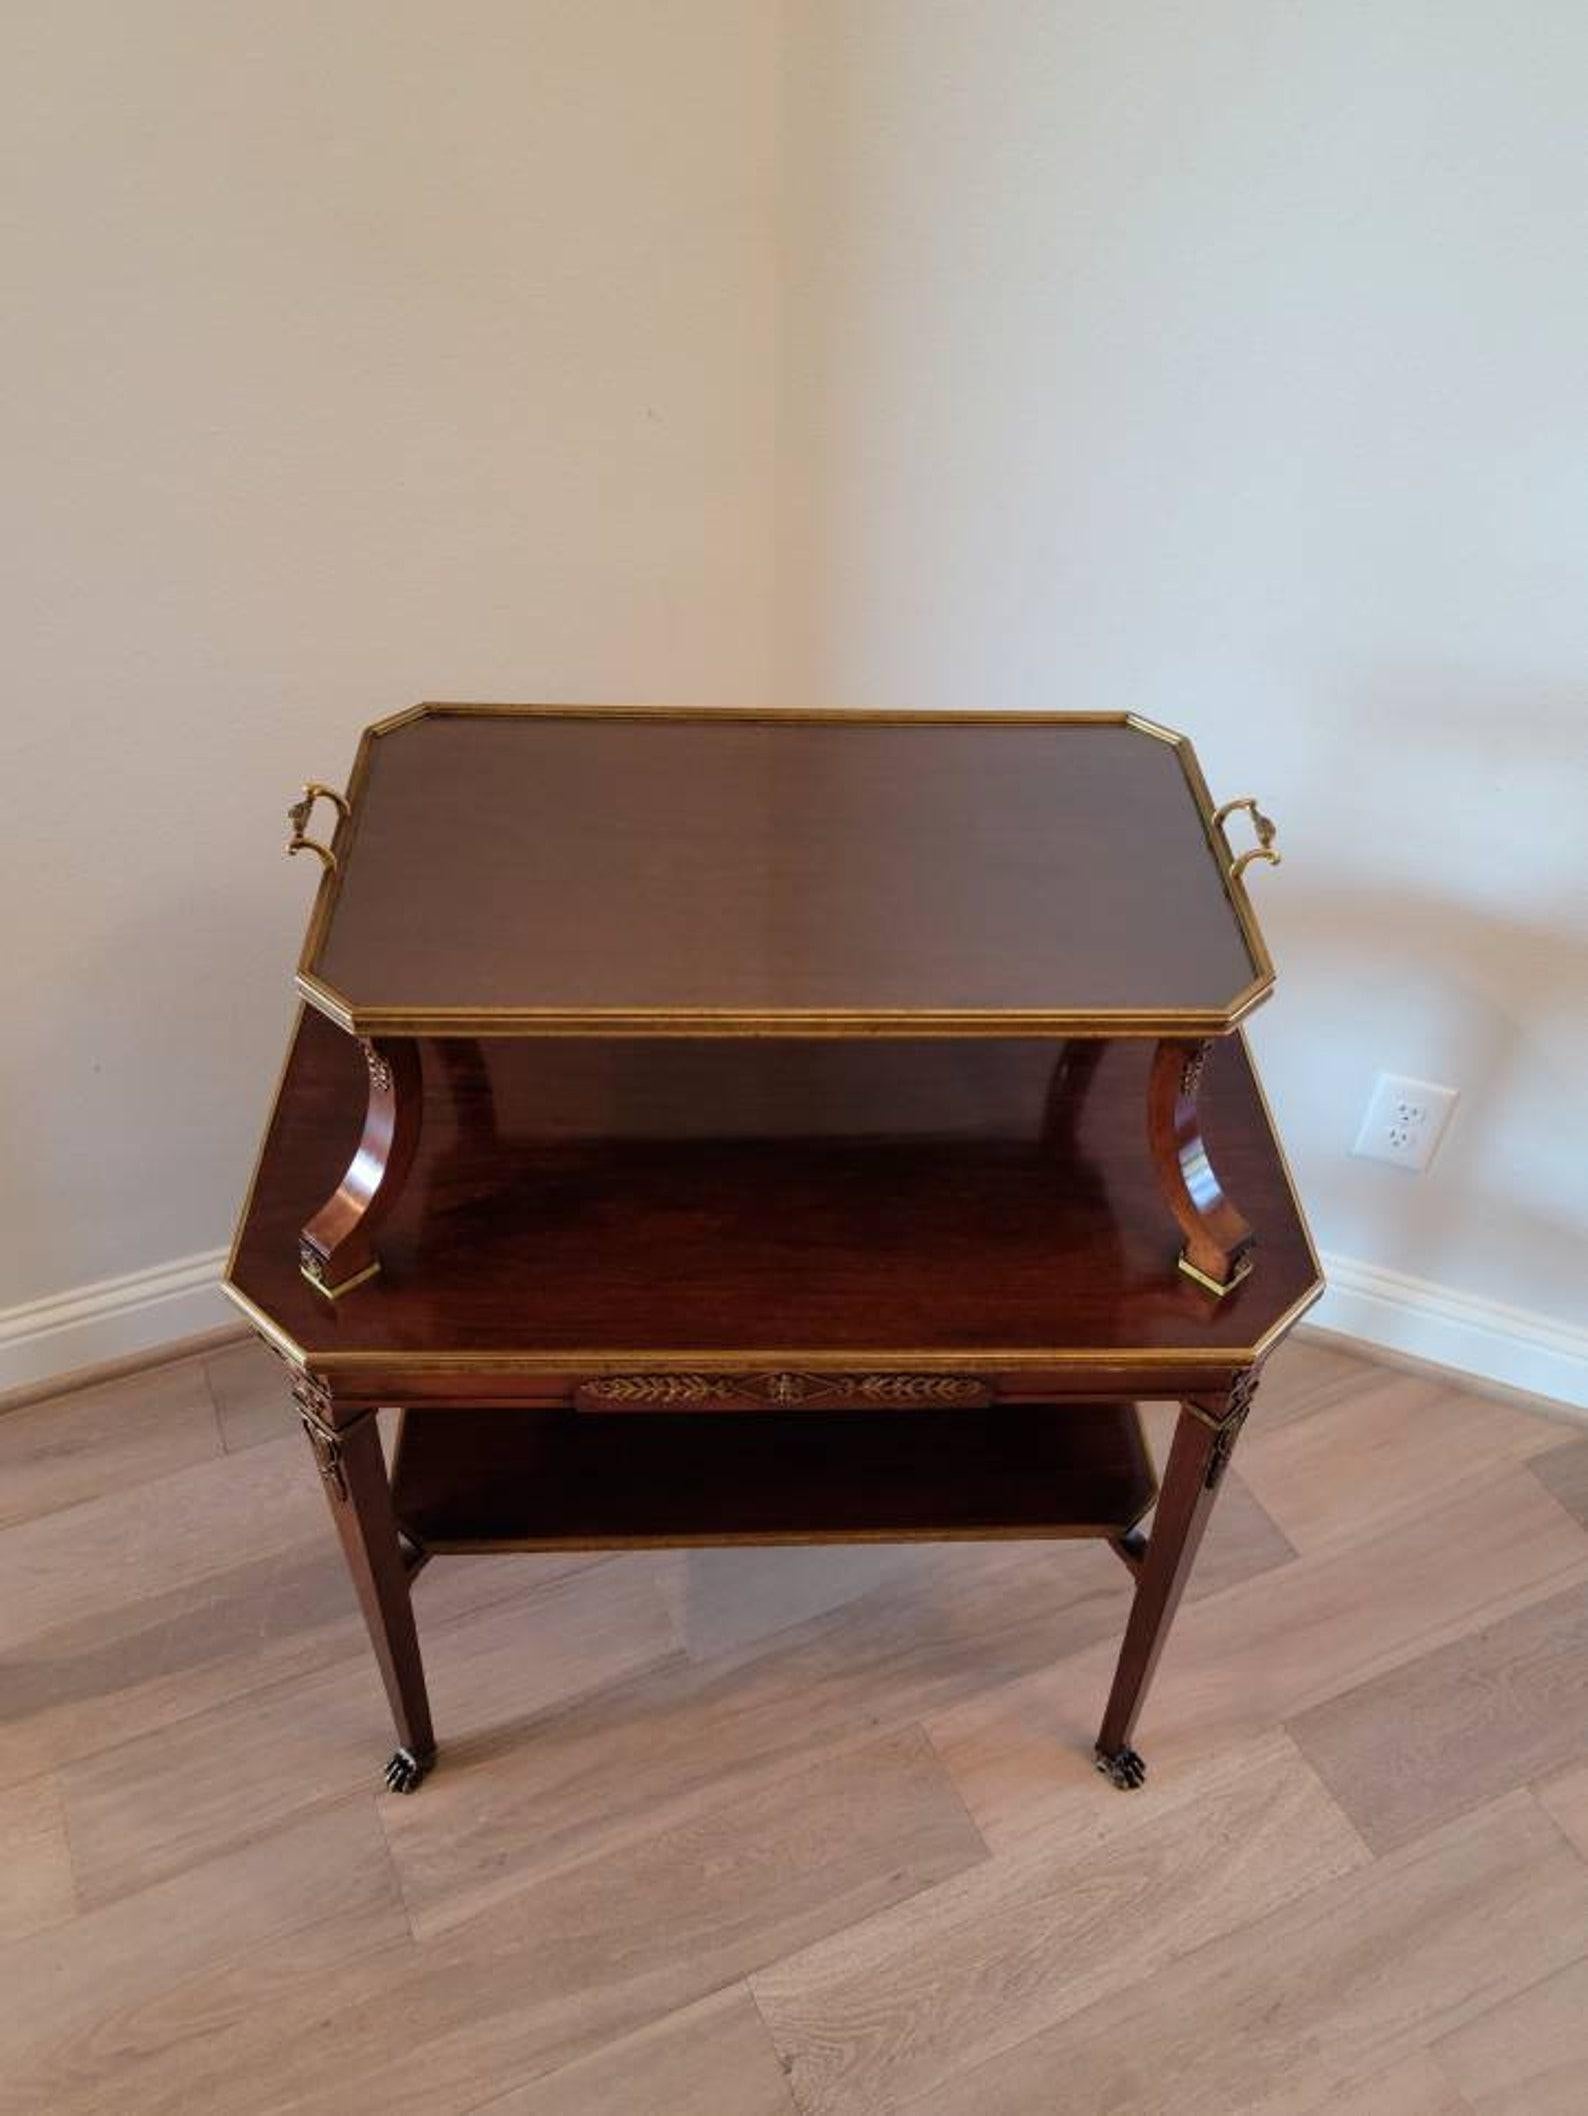 Krieger Signed Antique French Empire Tiered Tea Tray Table In Good Condition For Sale In Forney, TX